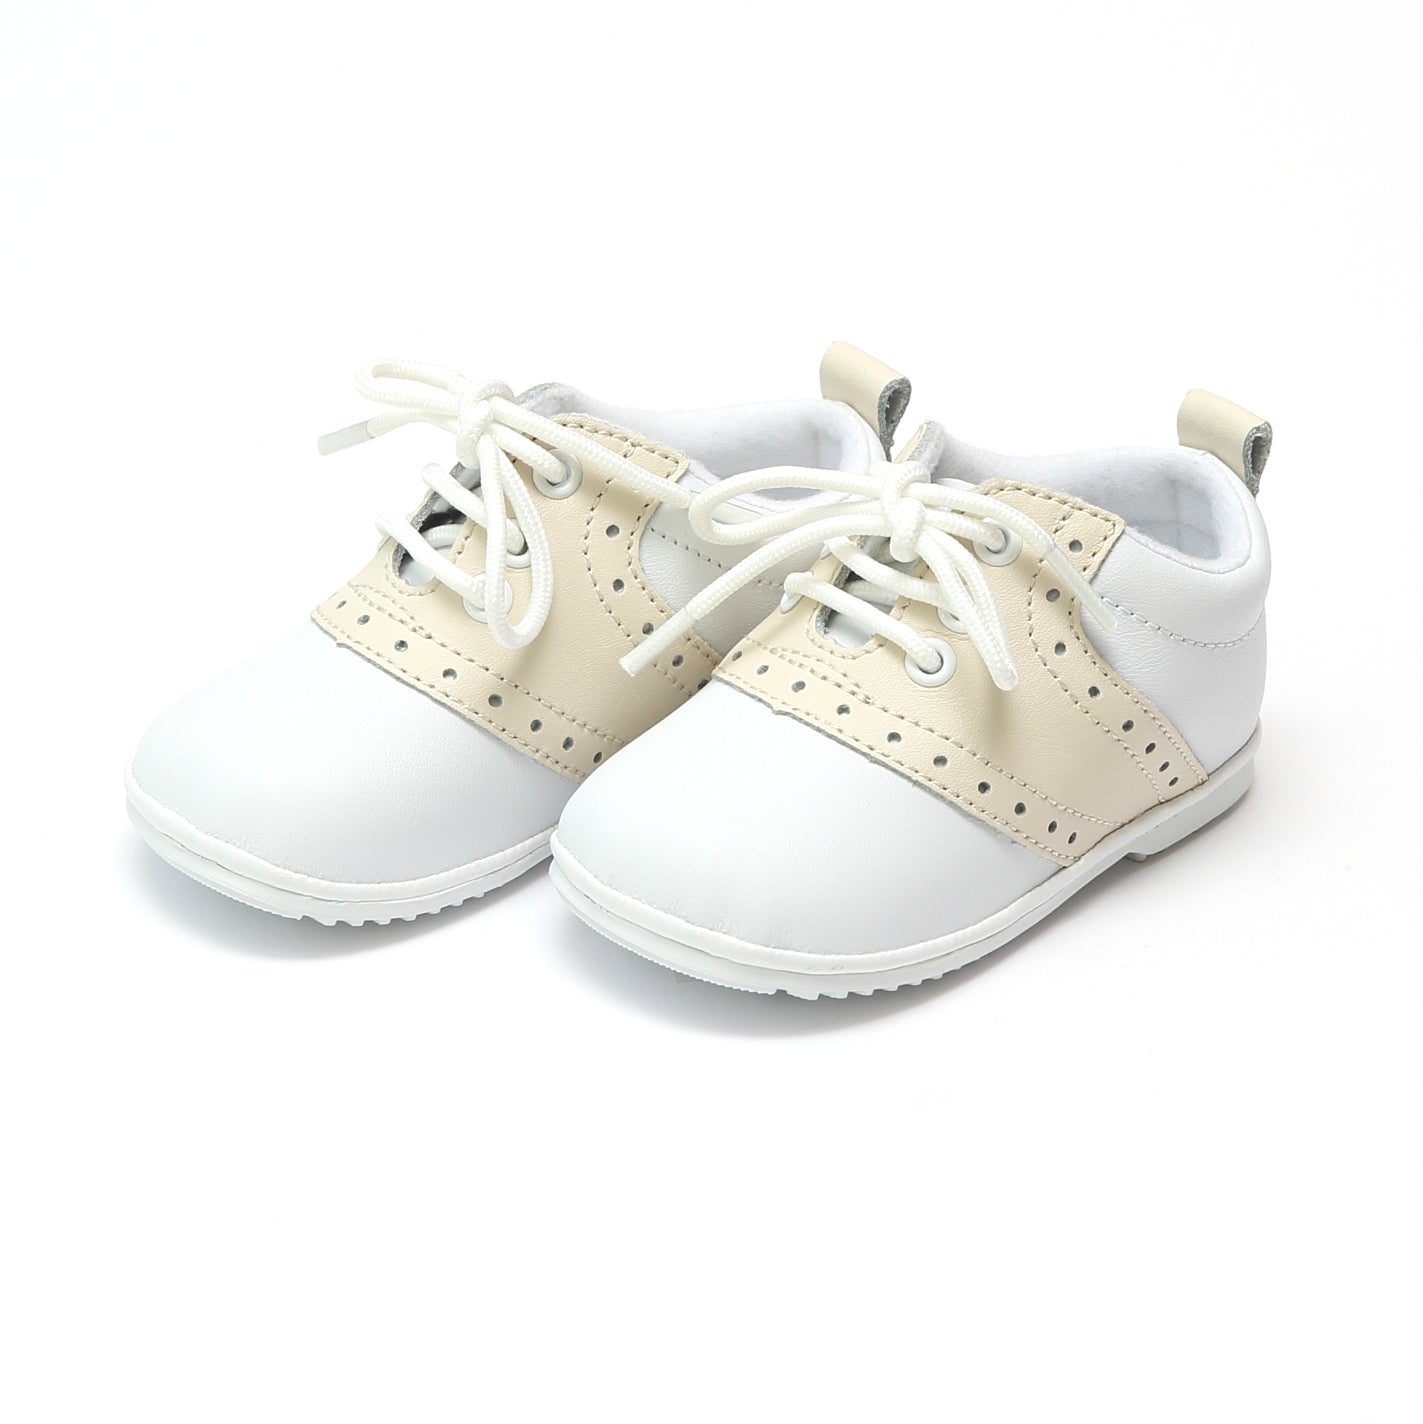 Angel Austin Beige Leather Saddle Oxford Shoe - Babies & Toddlers Lace Up Shoes